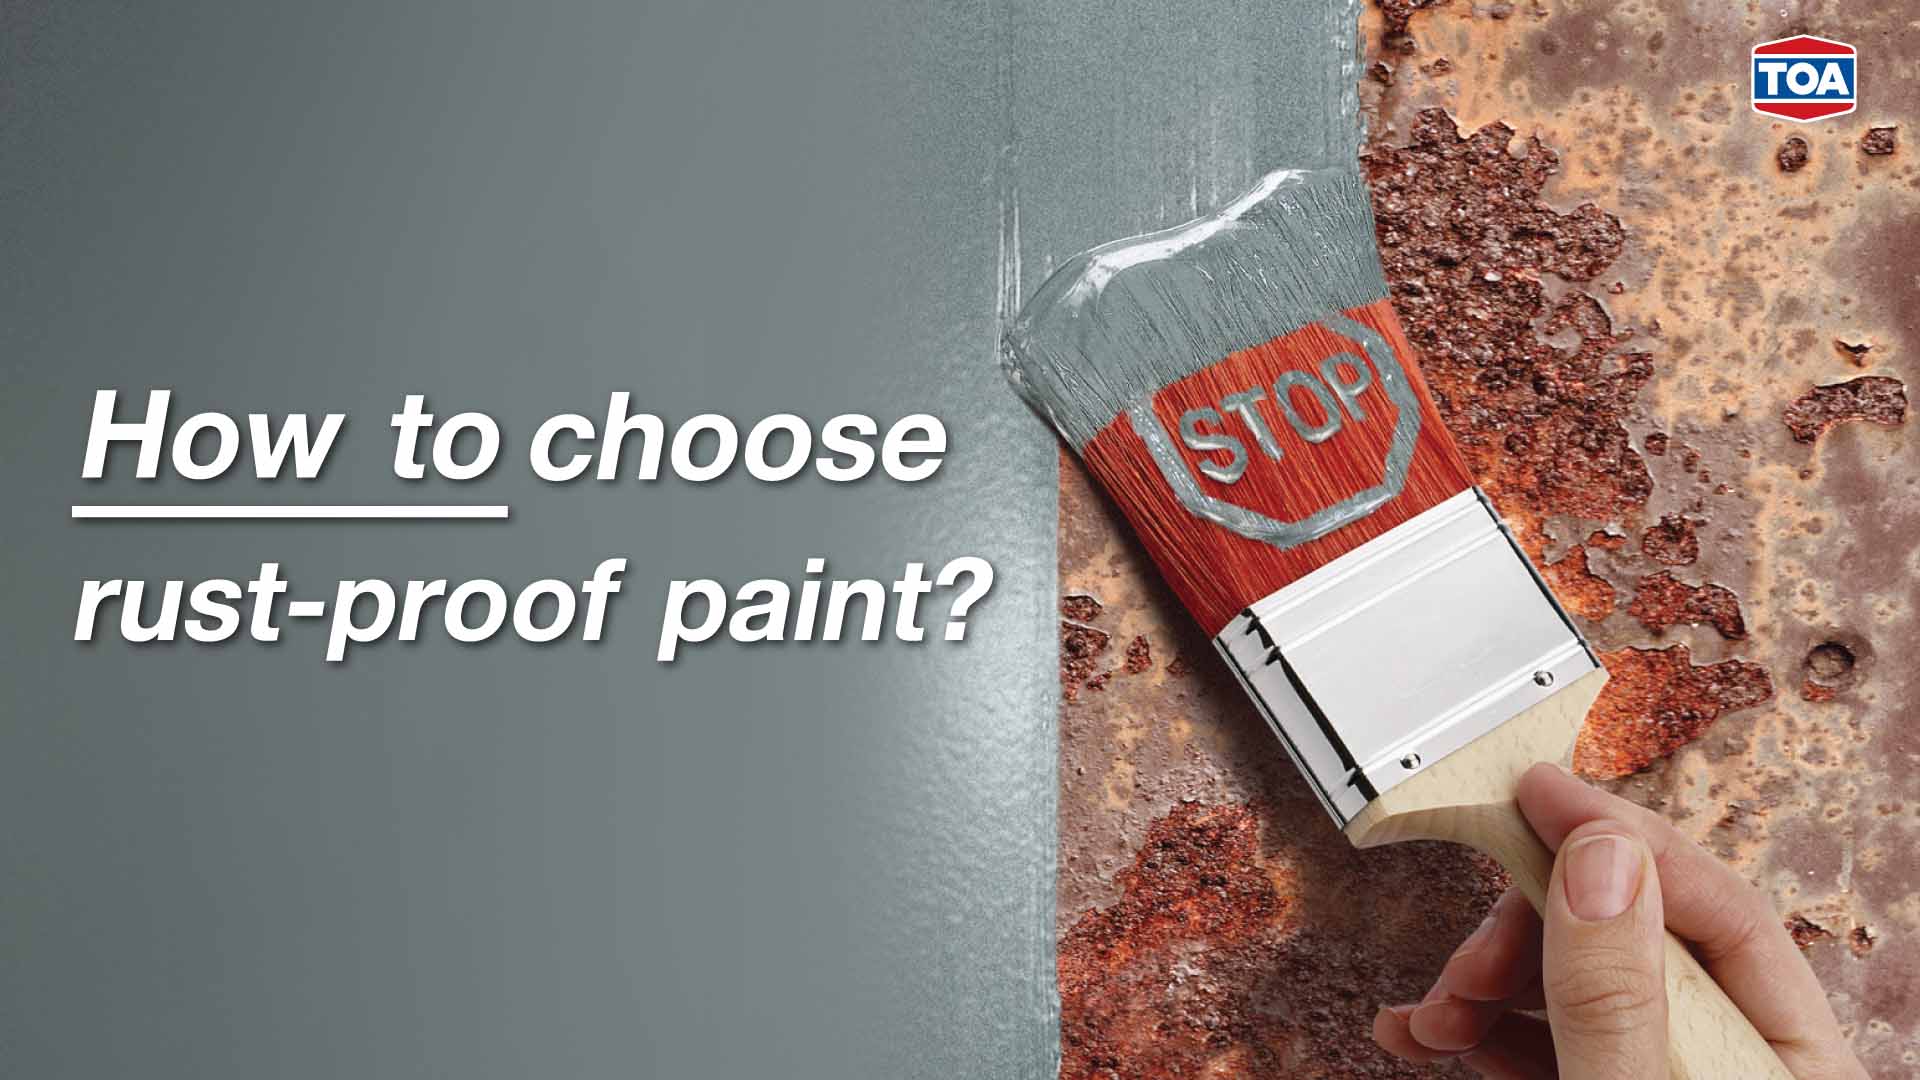 How to choose rust-proof paint